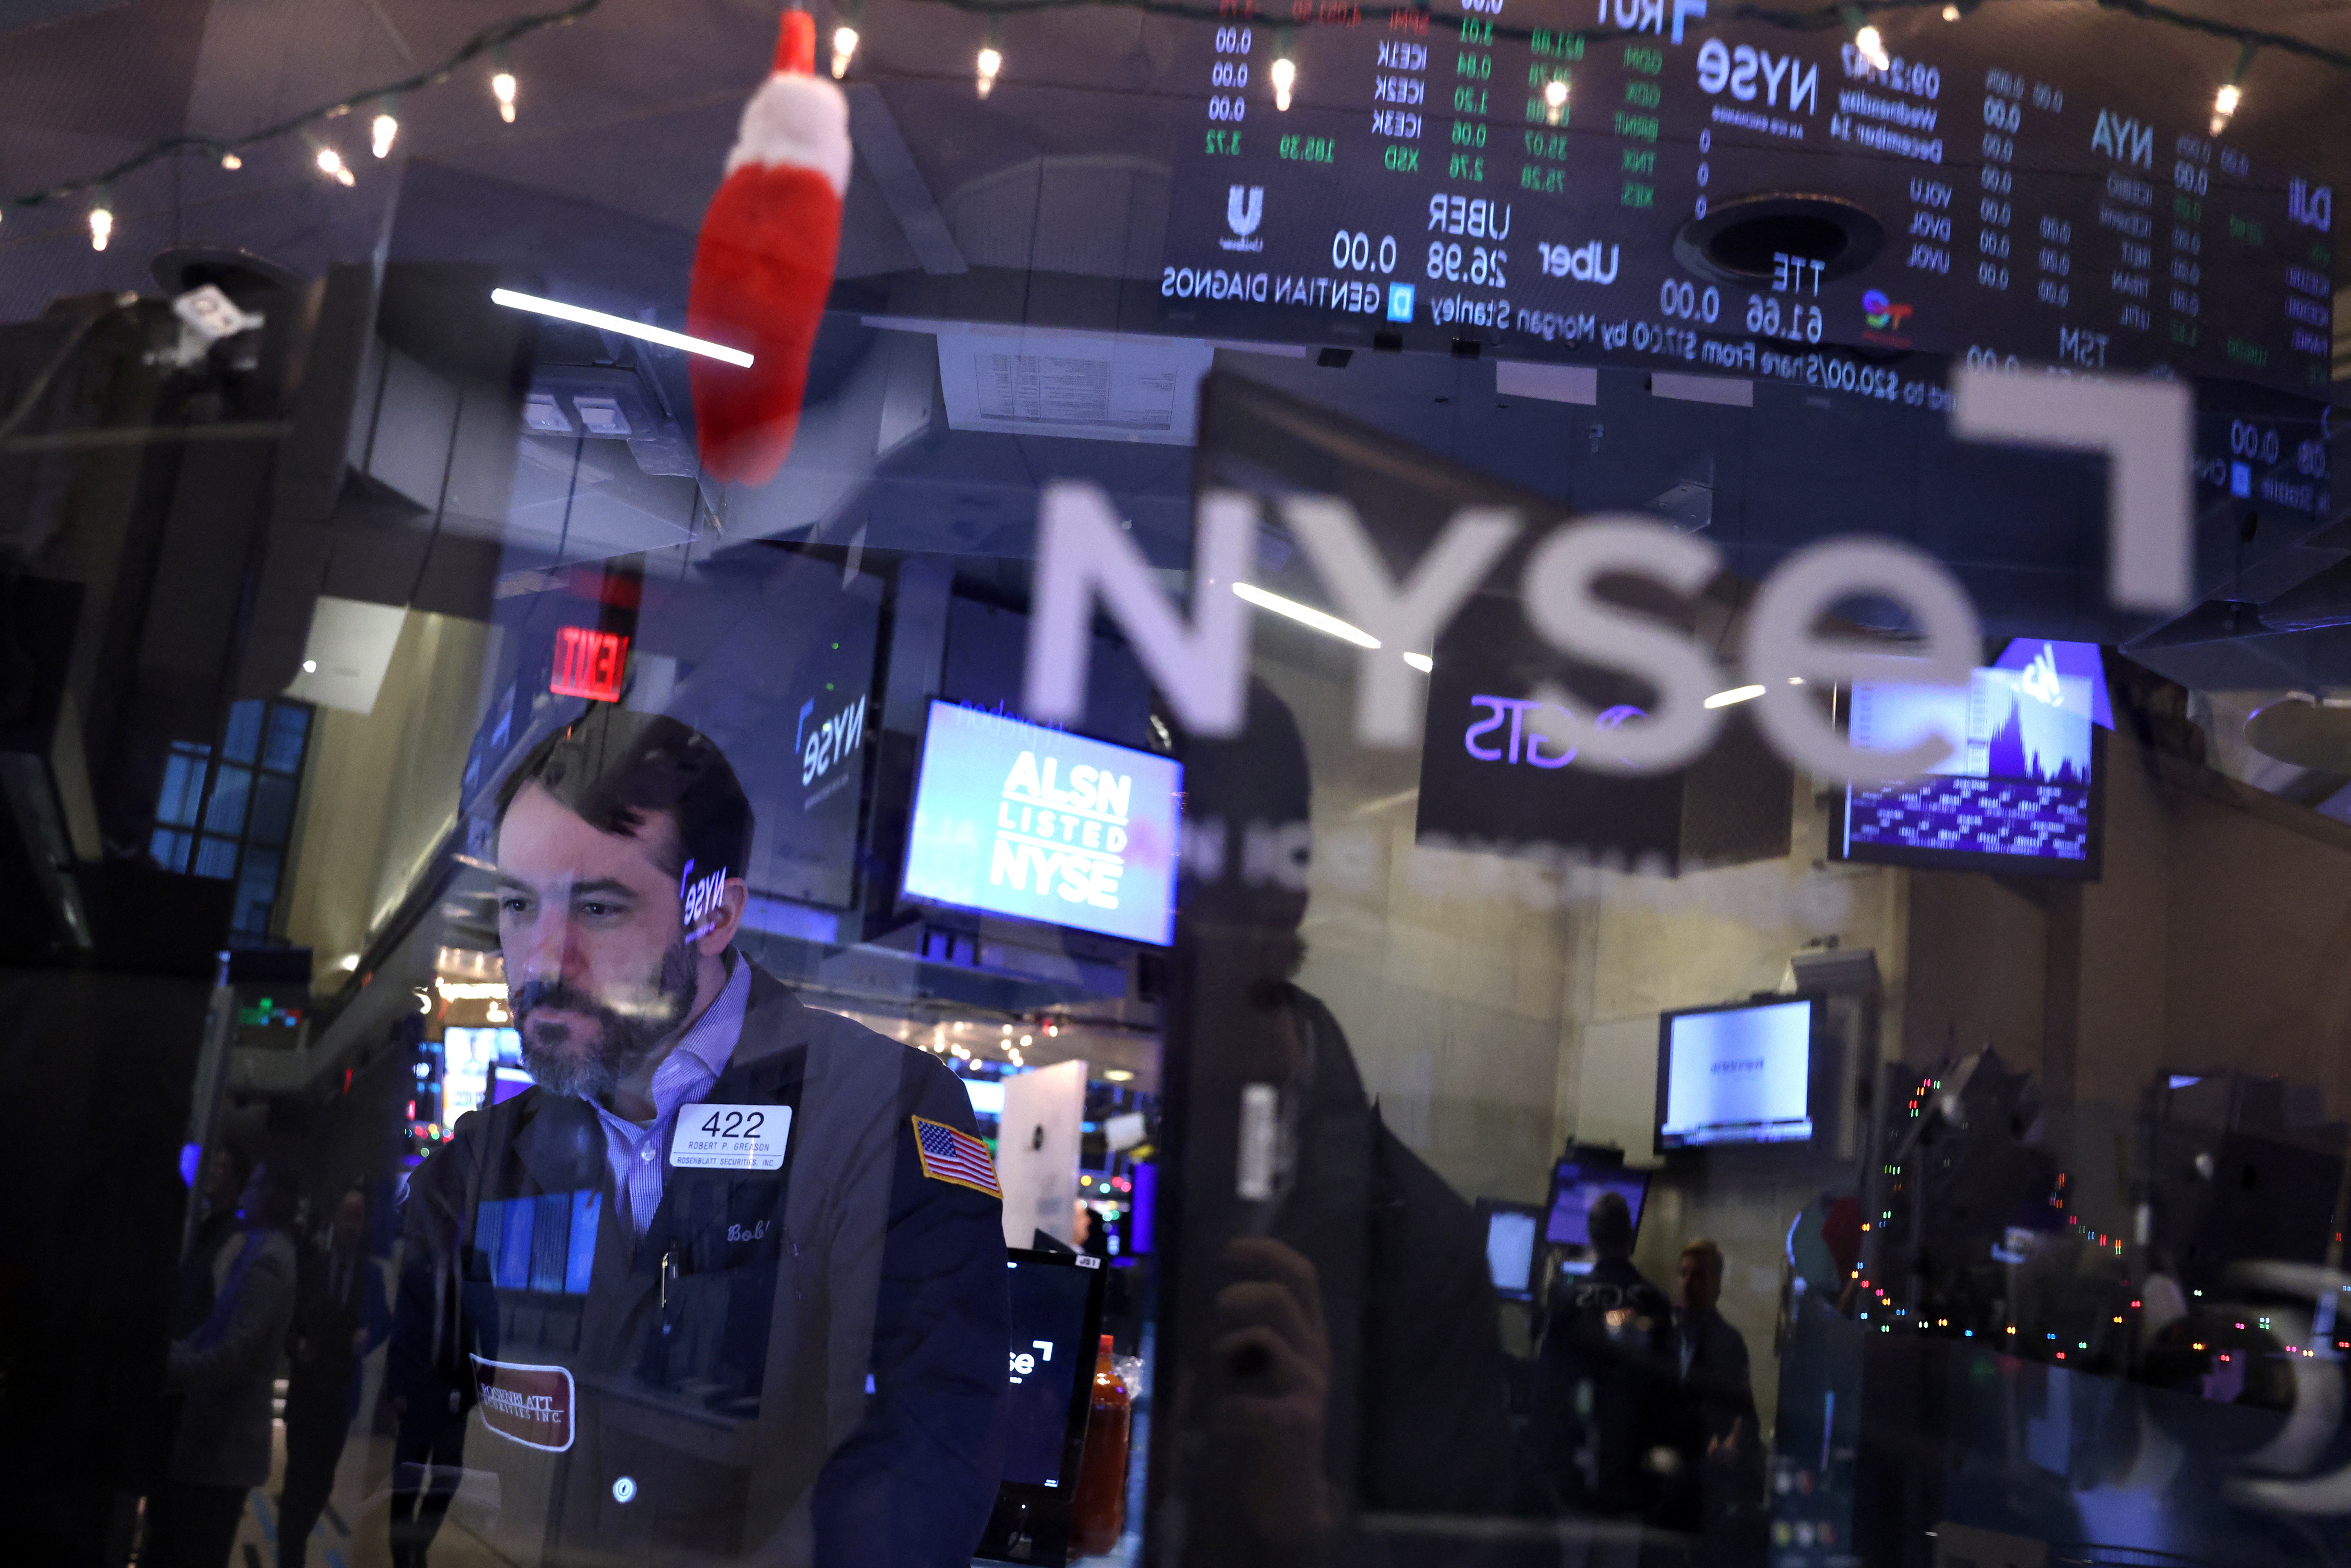 A trader works on the trading floor of the New York Stock Exchange (NYSE) in New York City